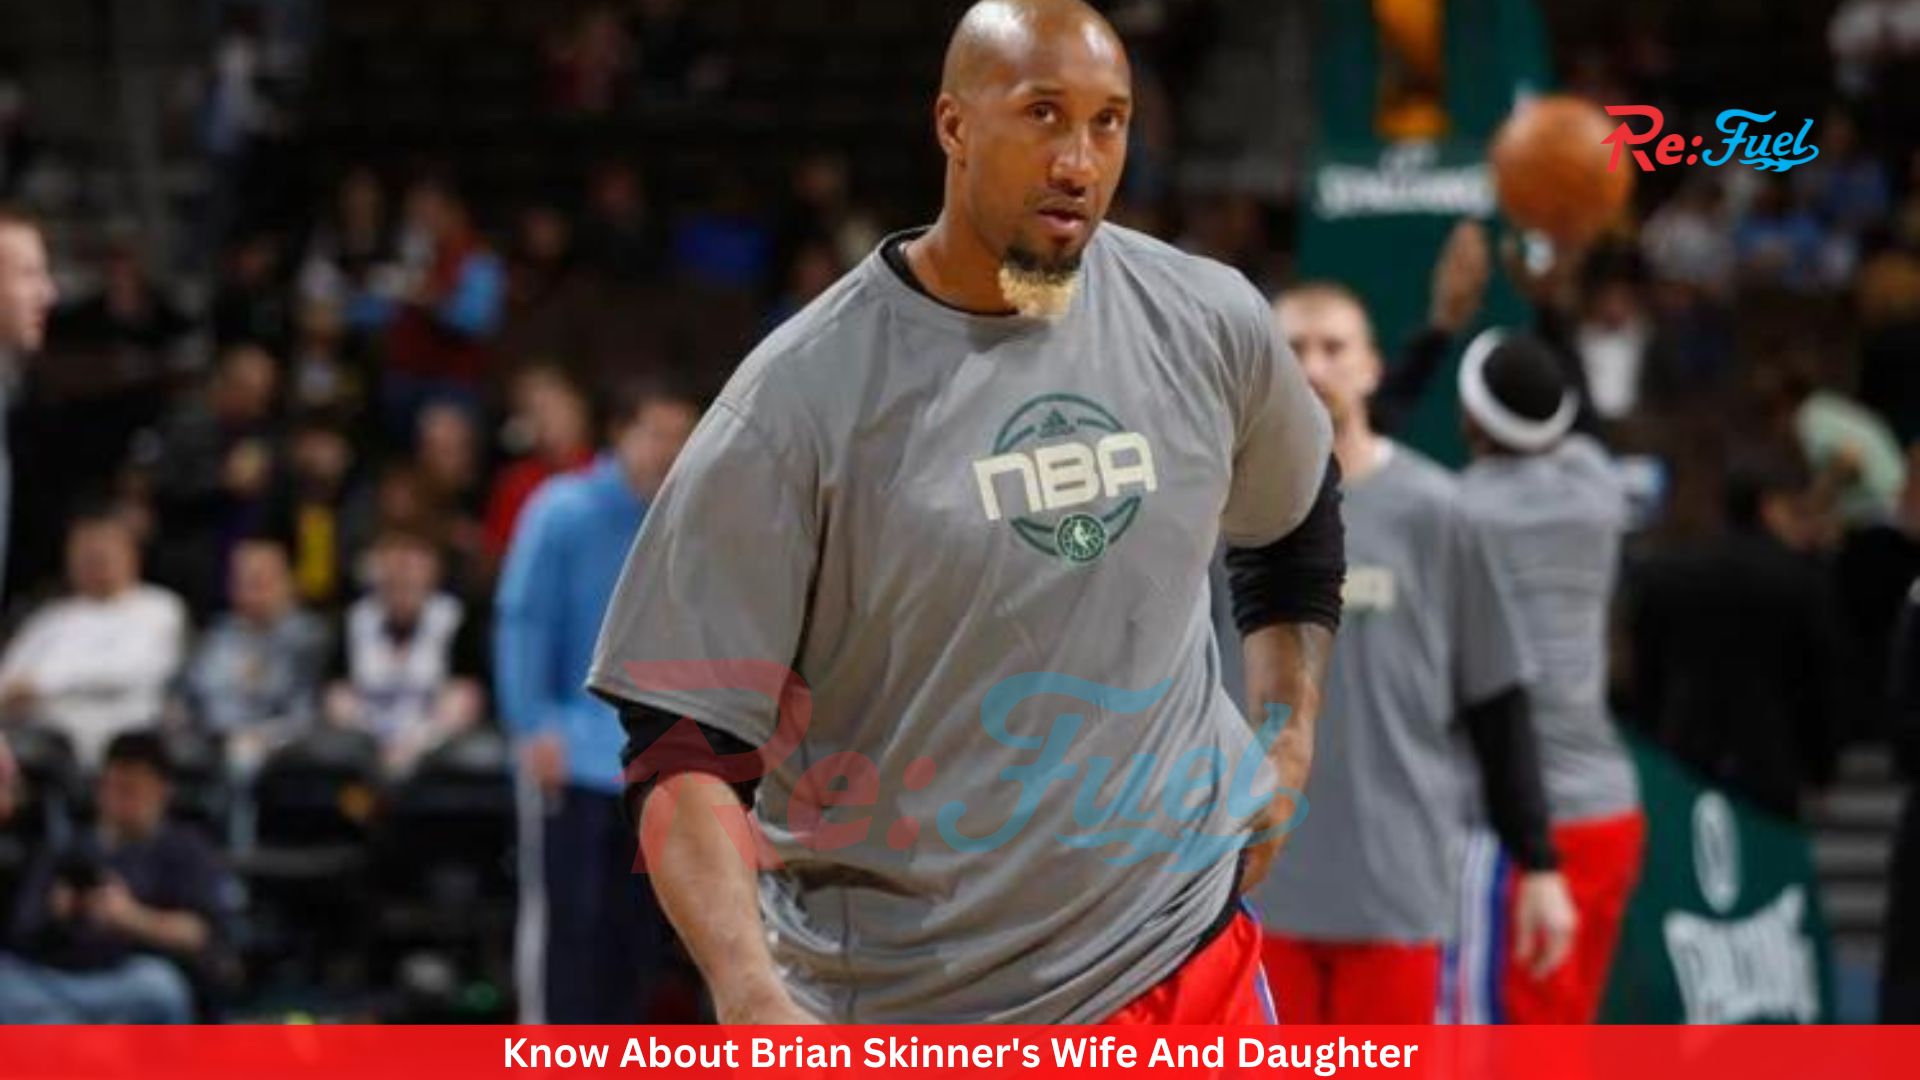 Know About Brian Skinner's Wife And Daughter